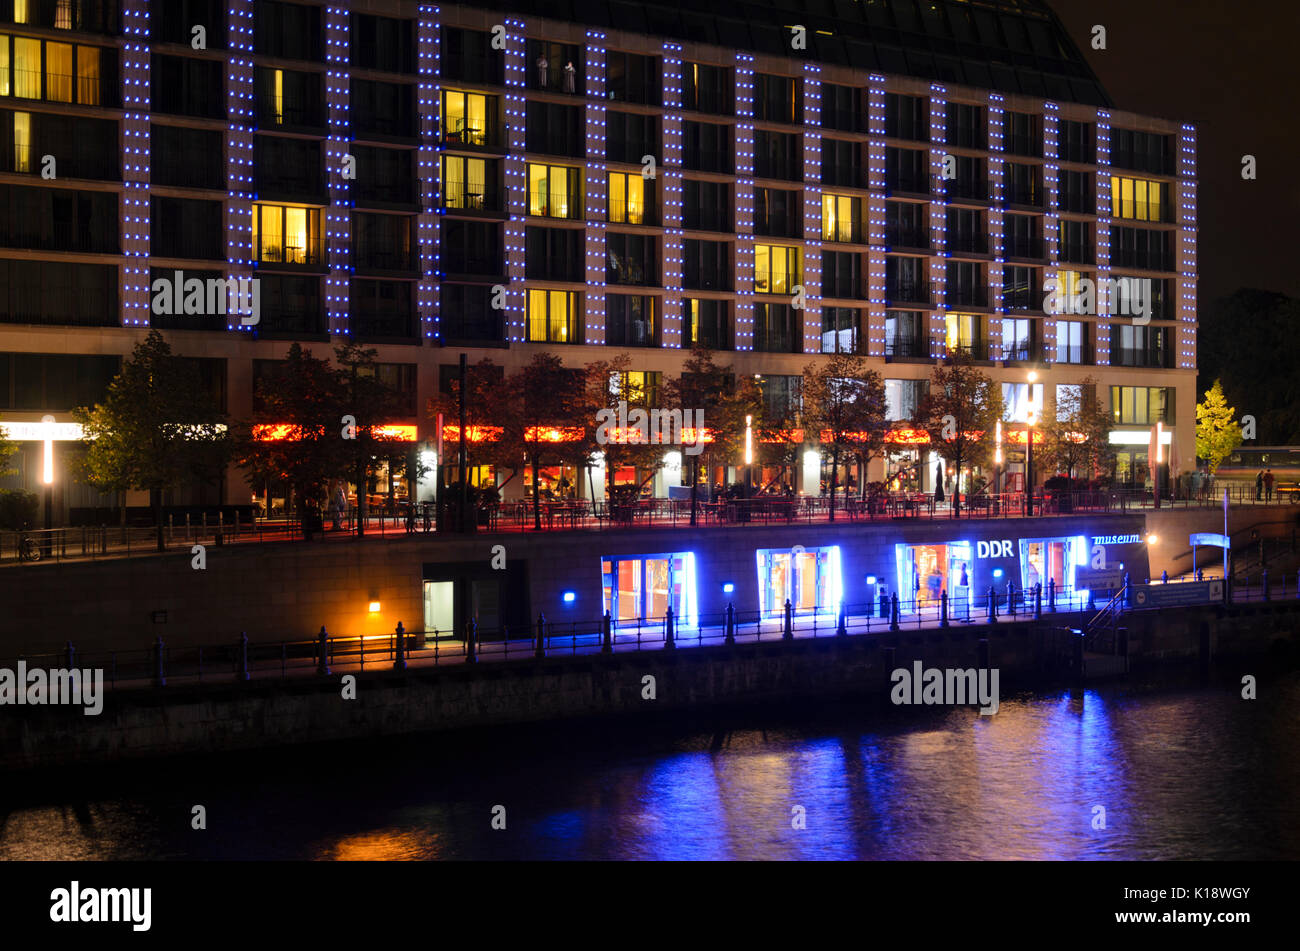 Light projection at Spree river, Germany Stock Photo